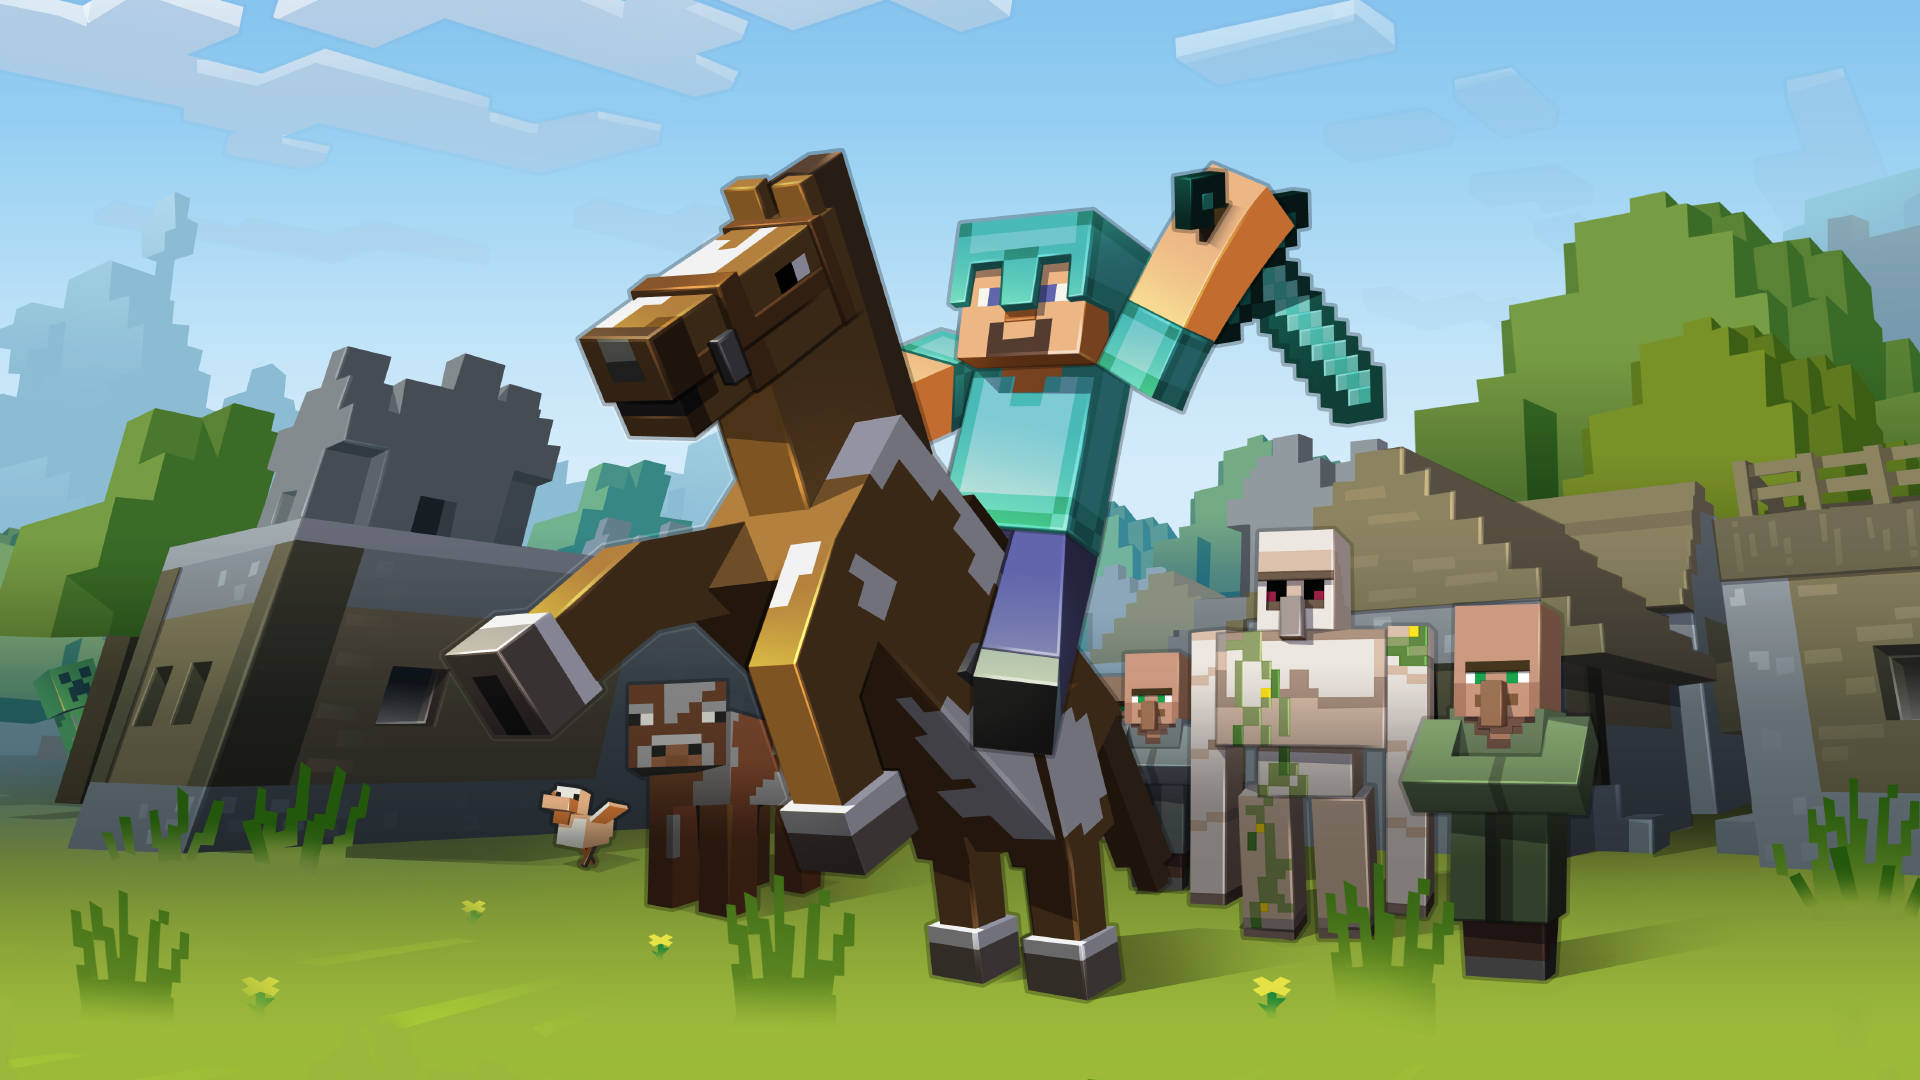 Get Ready For Adventure With Minecraft's Animated Knight Steve